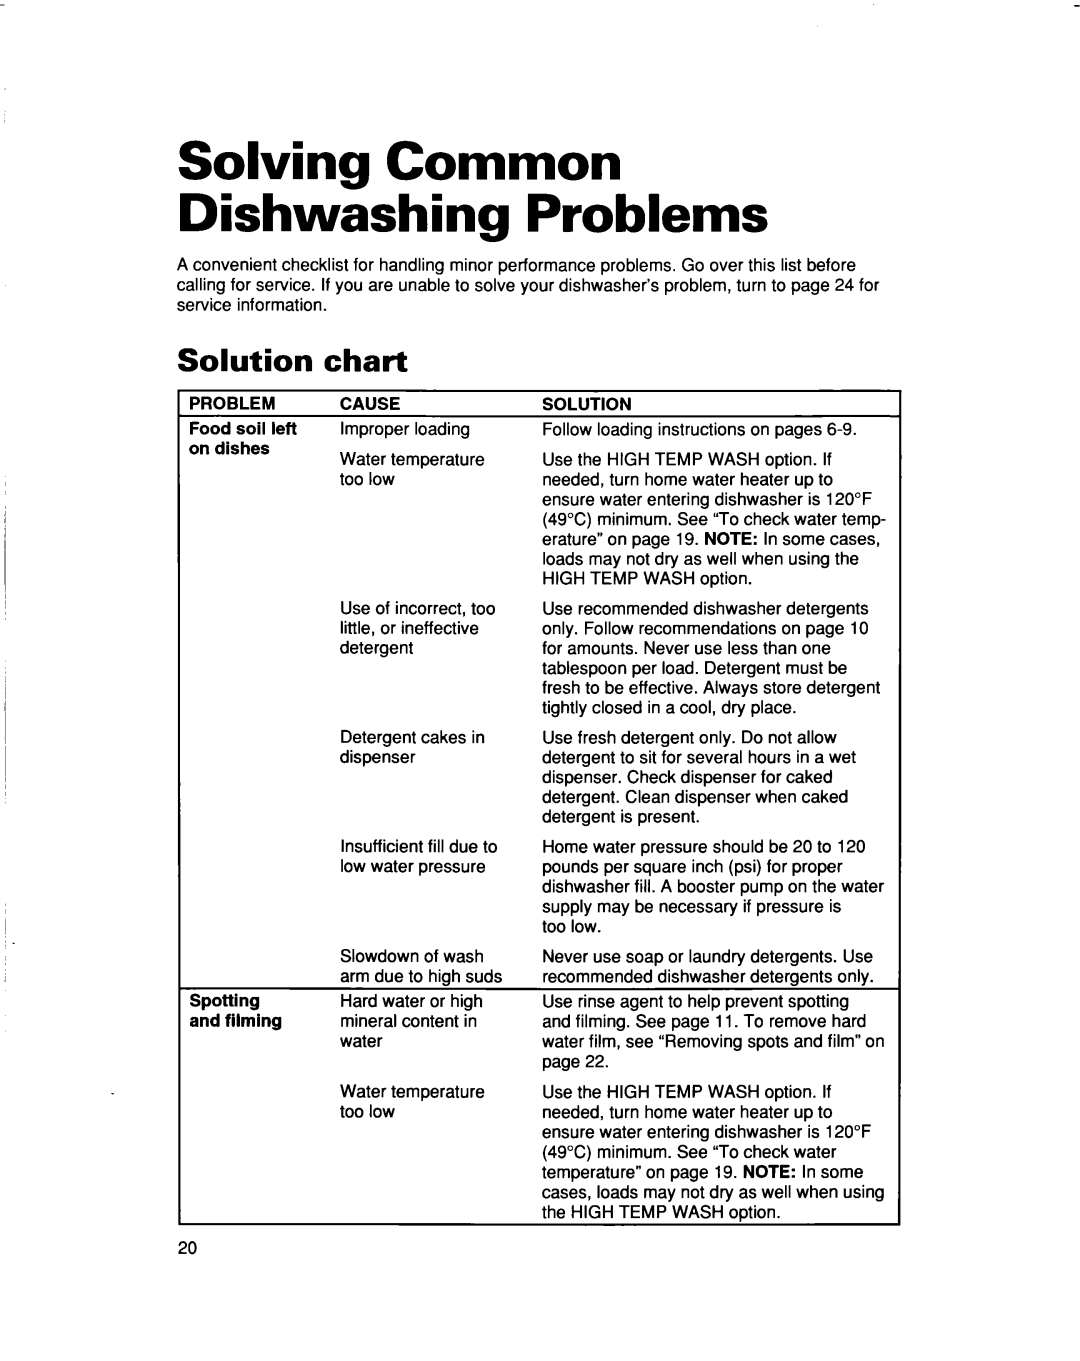 Whirlpool 960 Series warranty Solving Common Dishwashing Problems, Solution, chart 